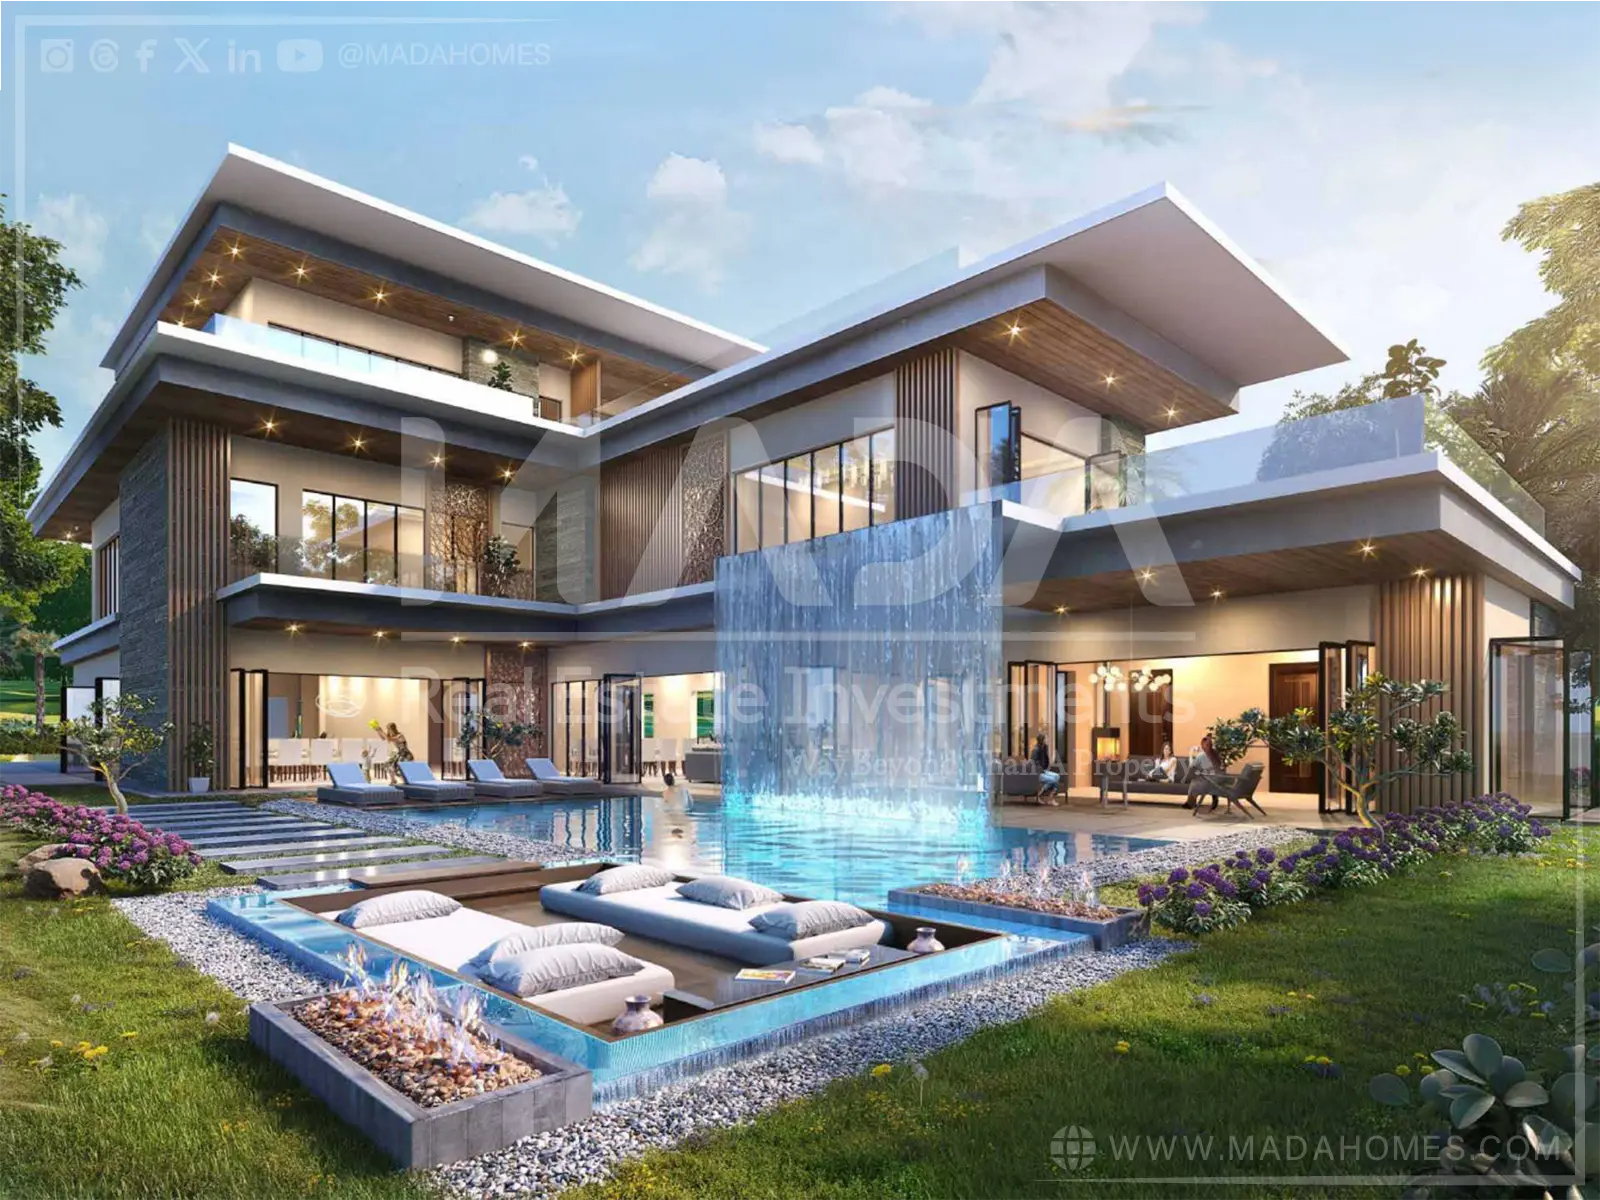 The most expensive villa in Dubai, learn about it